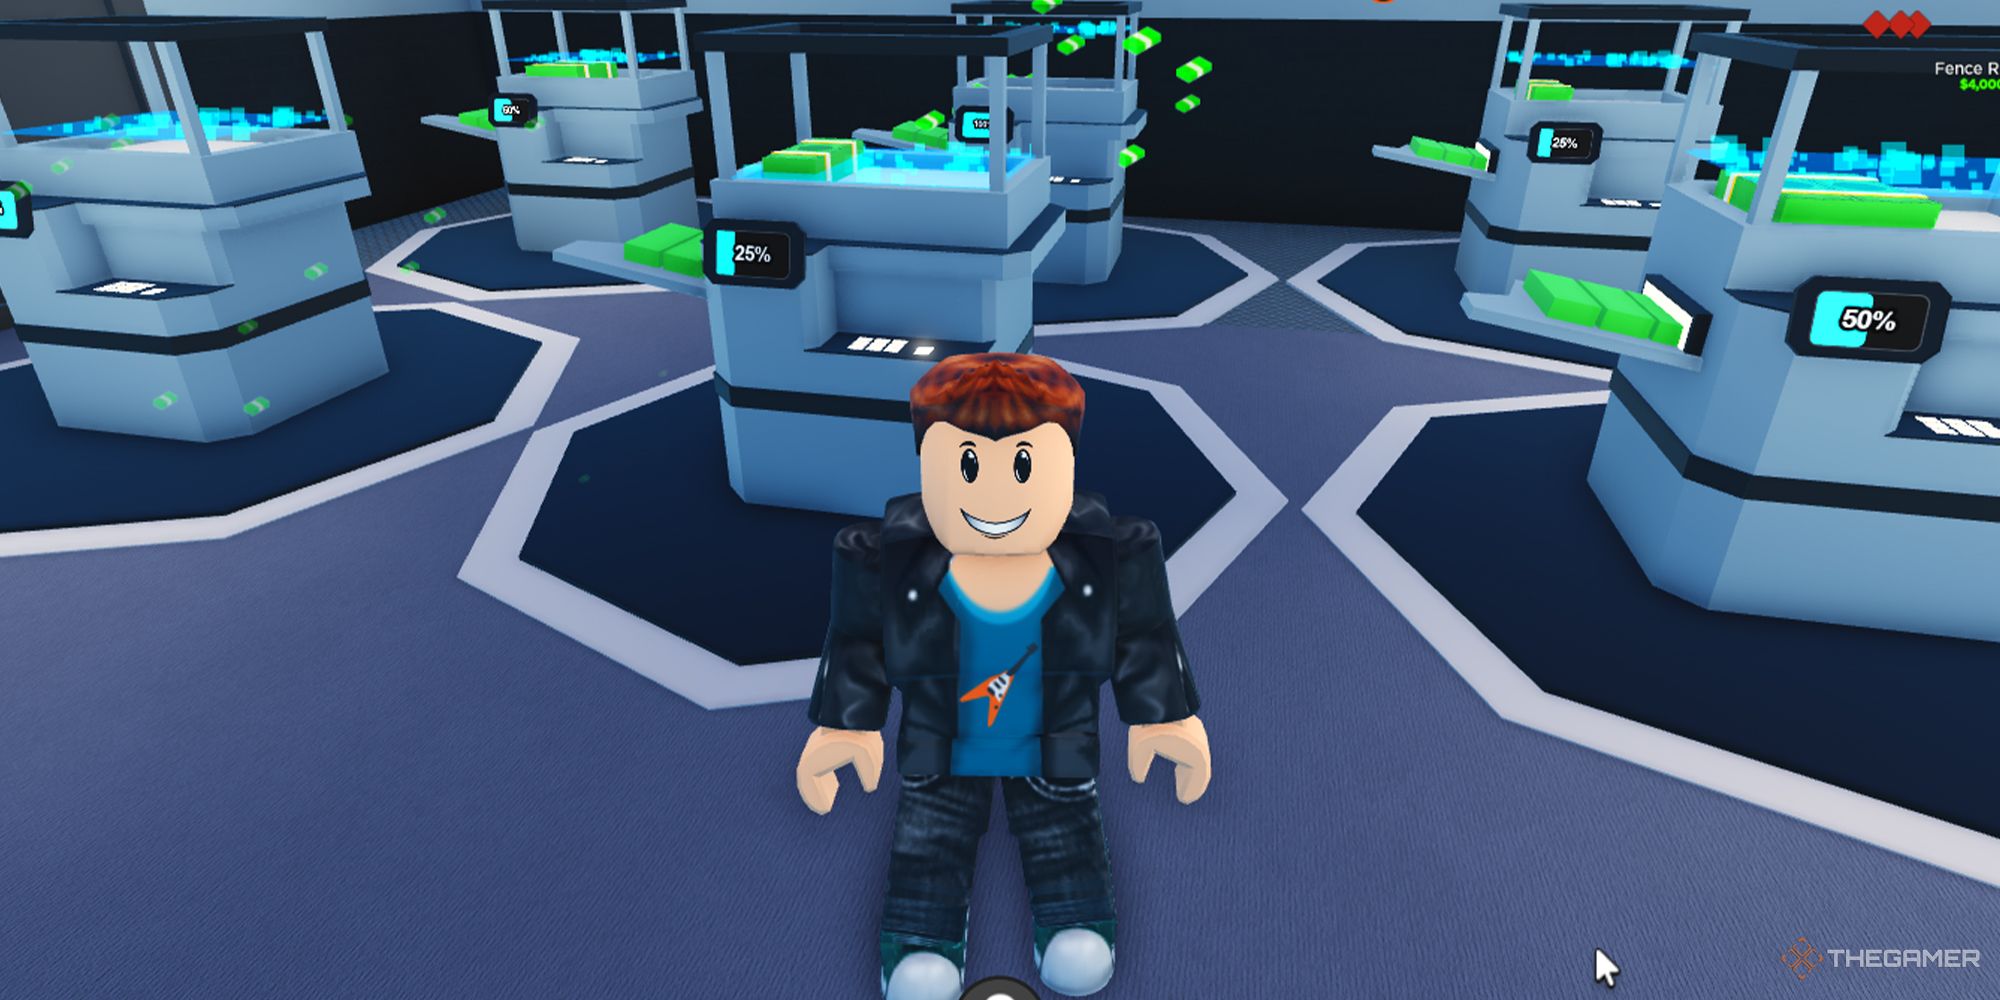 A Roblox character stands in front of several counterfit money-printing machines in Criminal Tycoon.